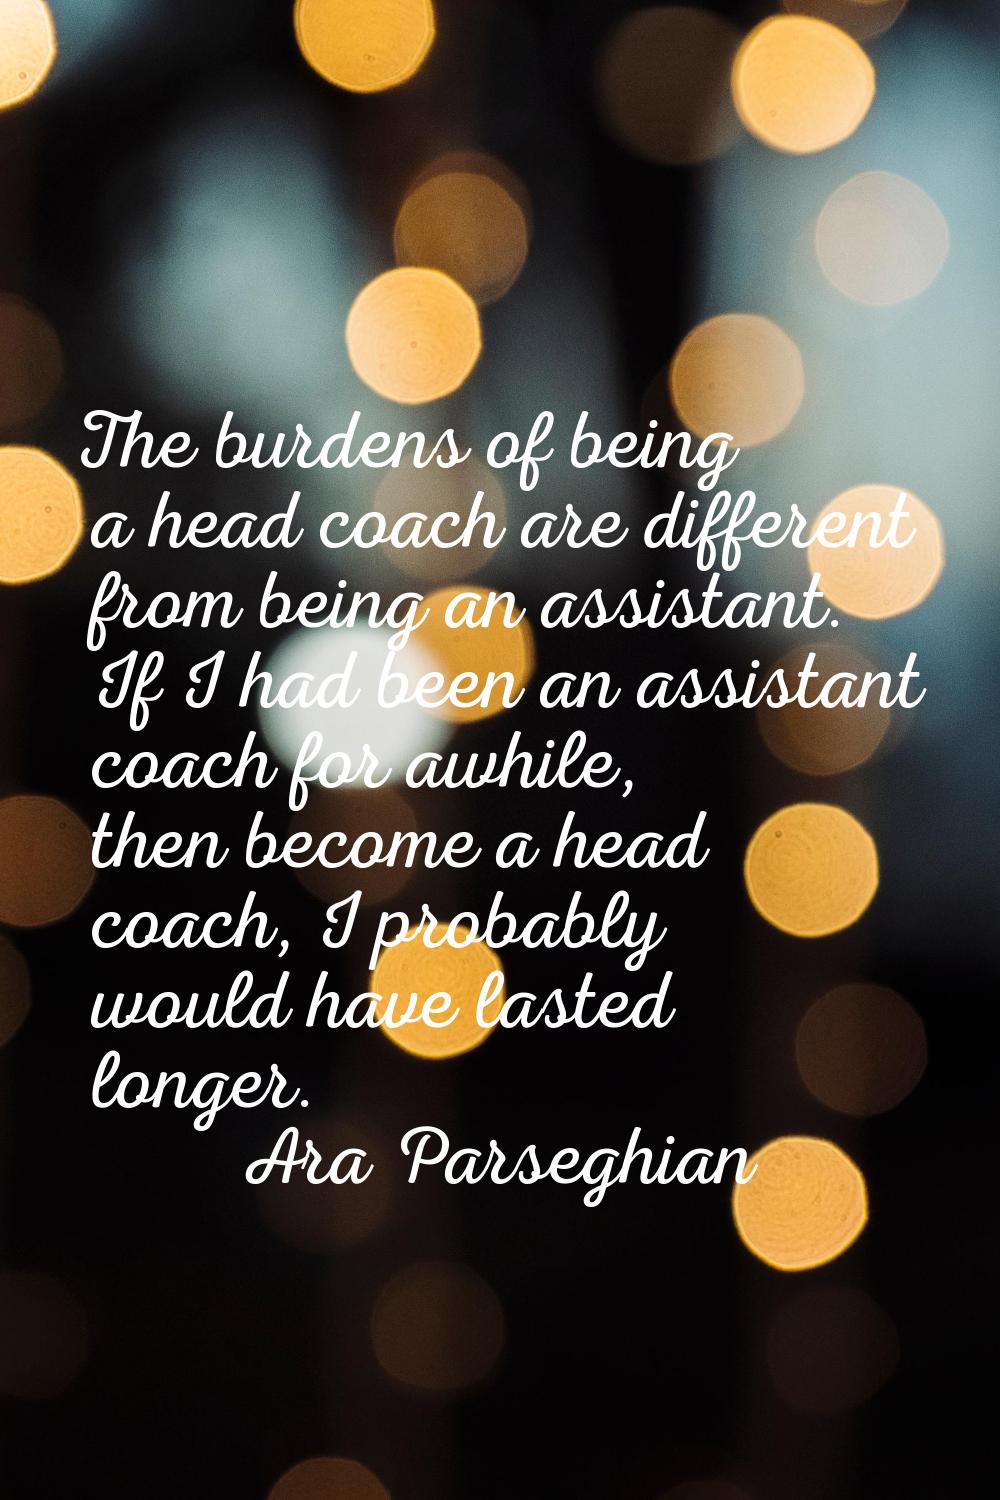 The burdens of being a head coach are different from being an assistant. If I had been an assistant